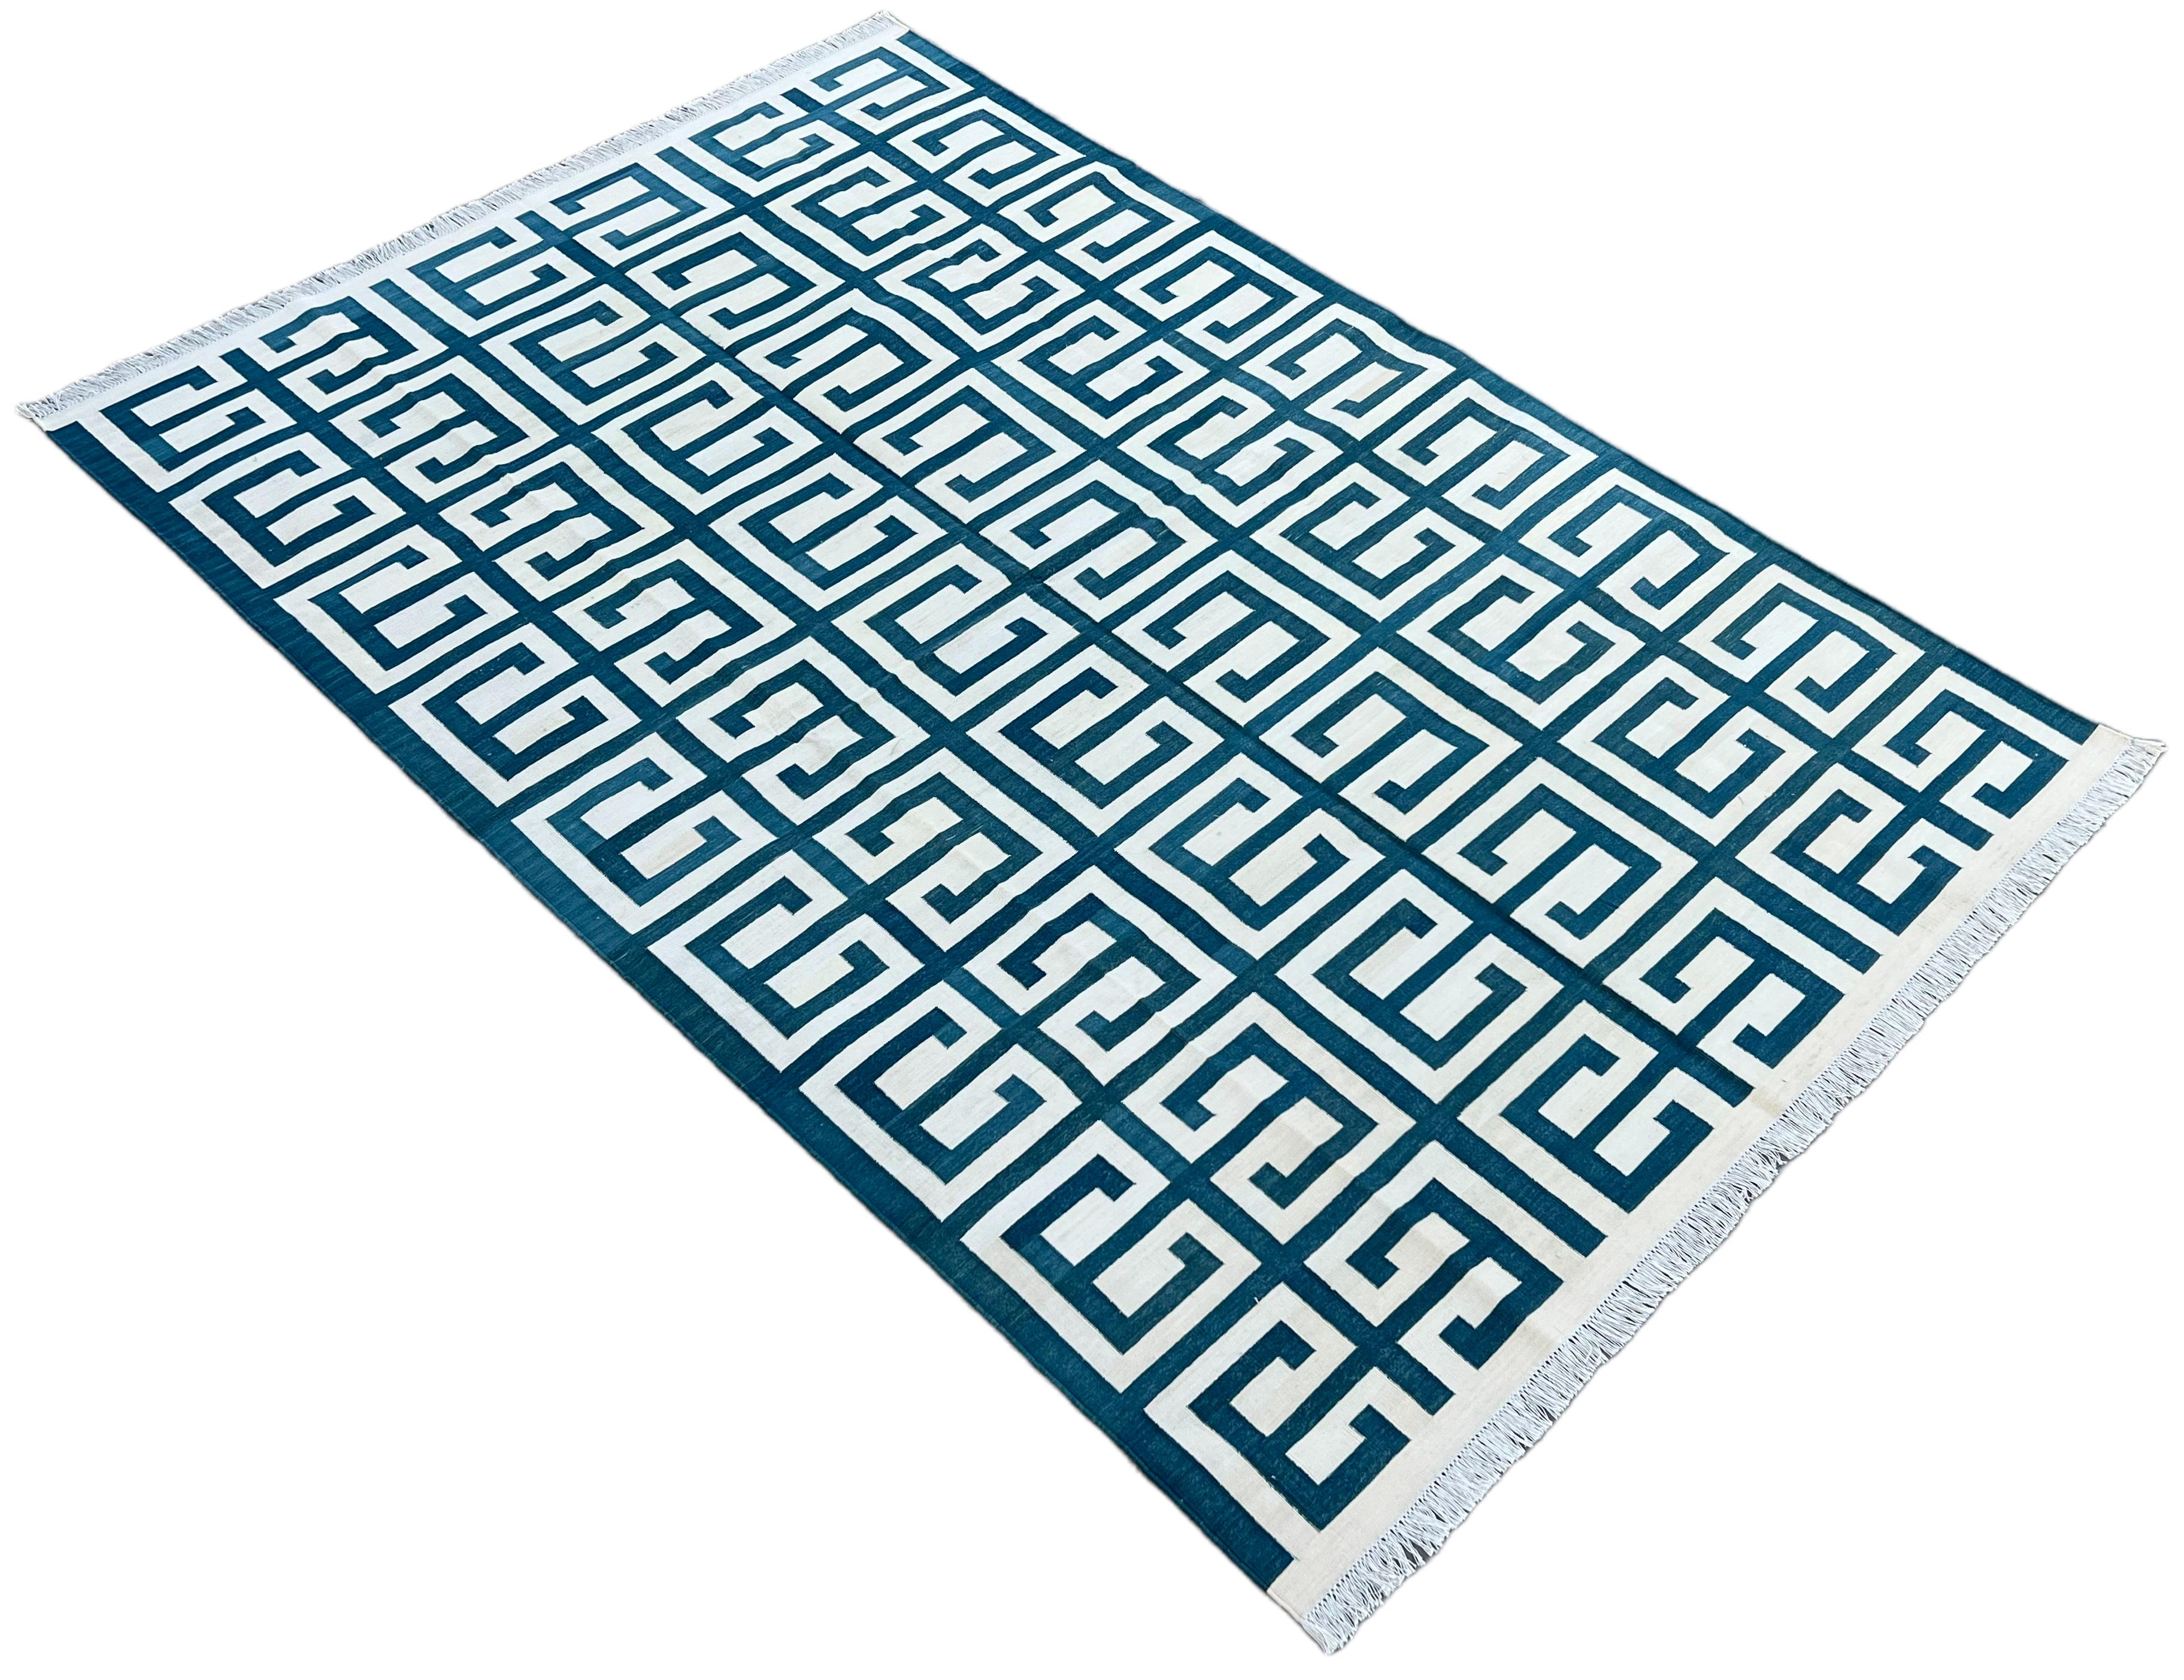 Cotton Vegetable Dyed Reversible Blue & White Geometric Patterned Indian Rug - 6'x9'
These special flat-weave dhurries are hand-woven with 15 ply 100% cotton yarn. Due to the special manufacturing techniques used to create our rugs, the size and